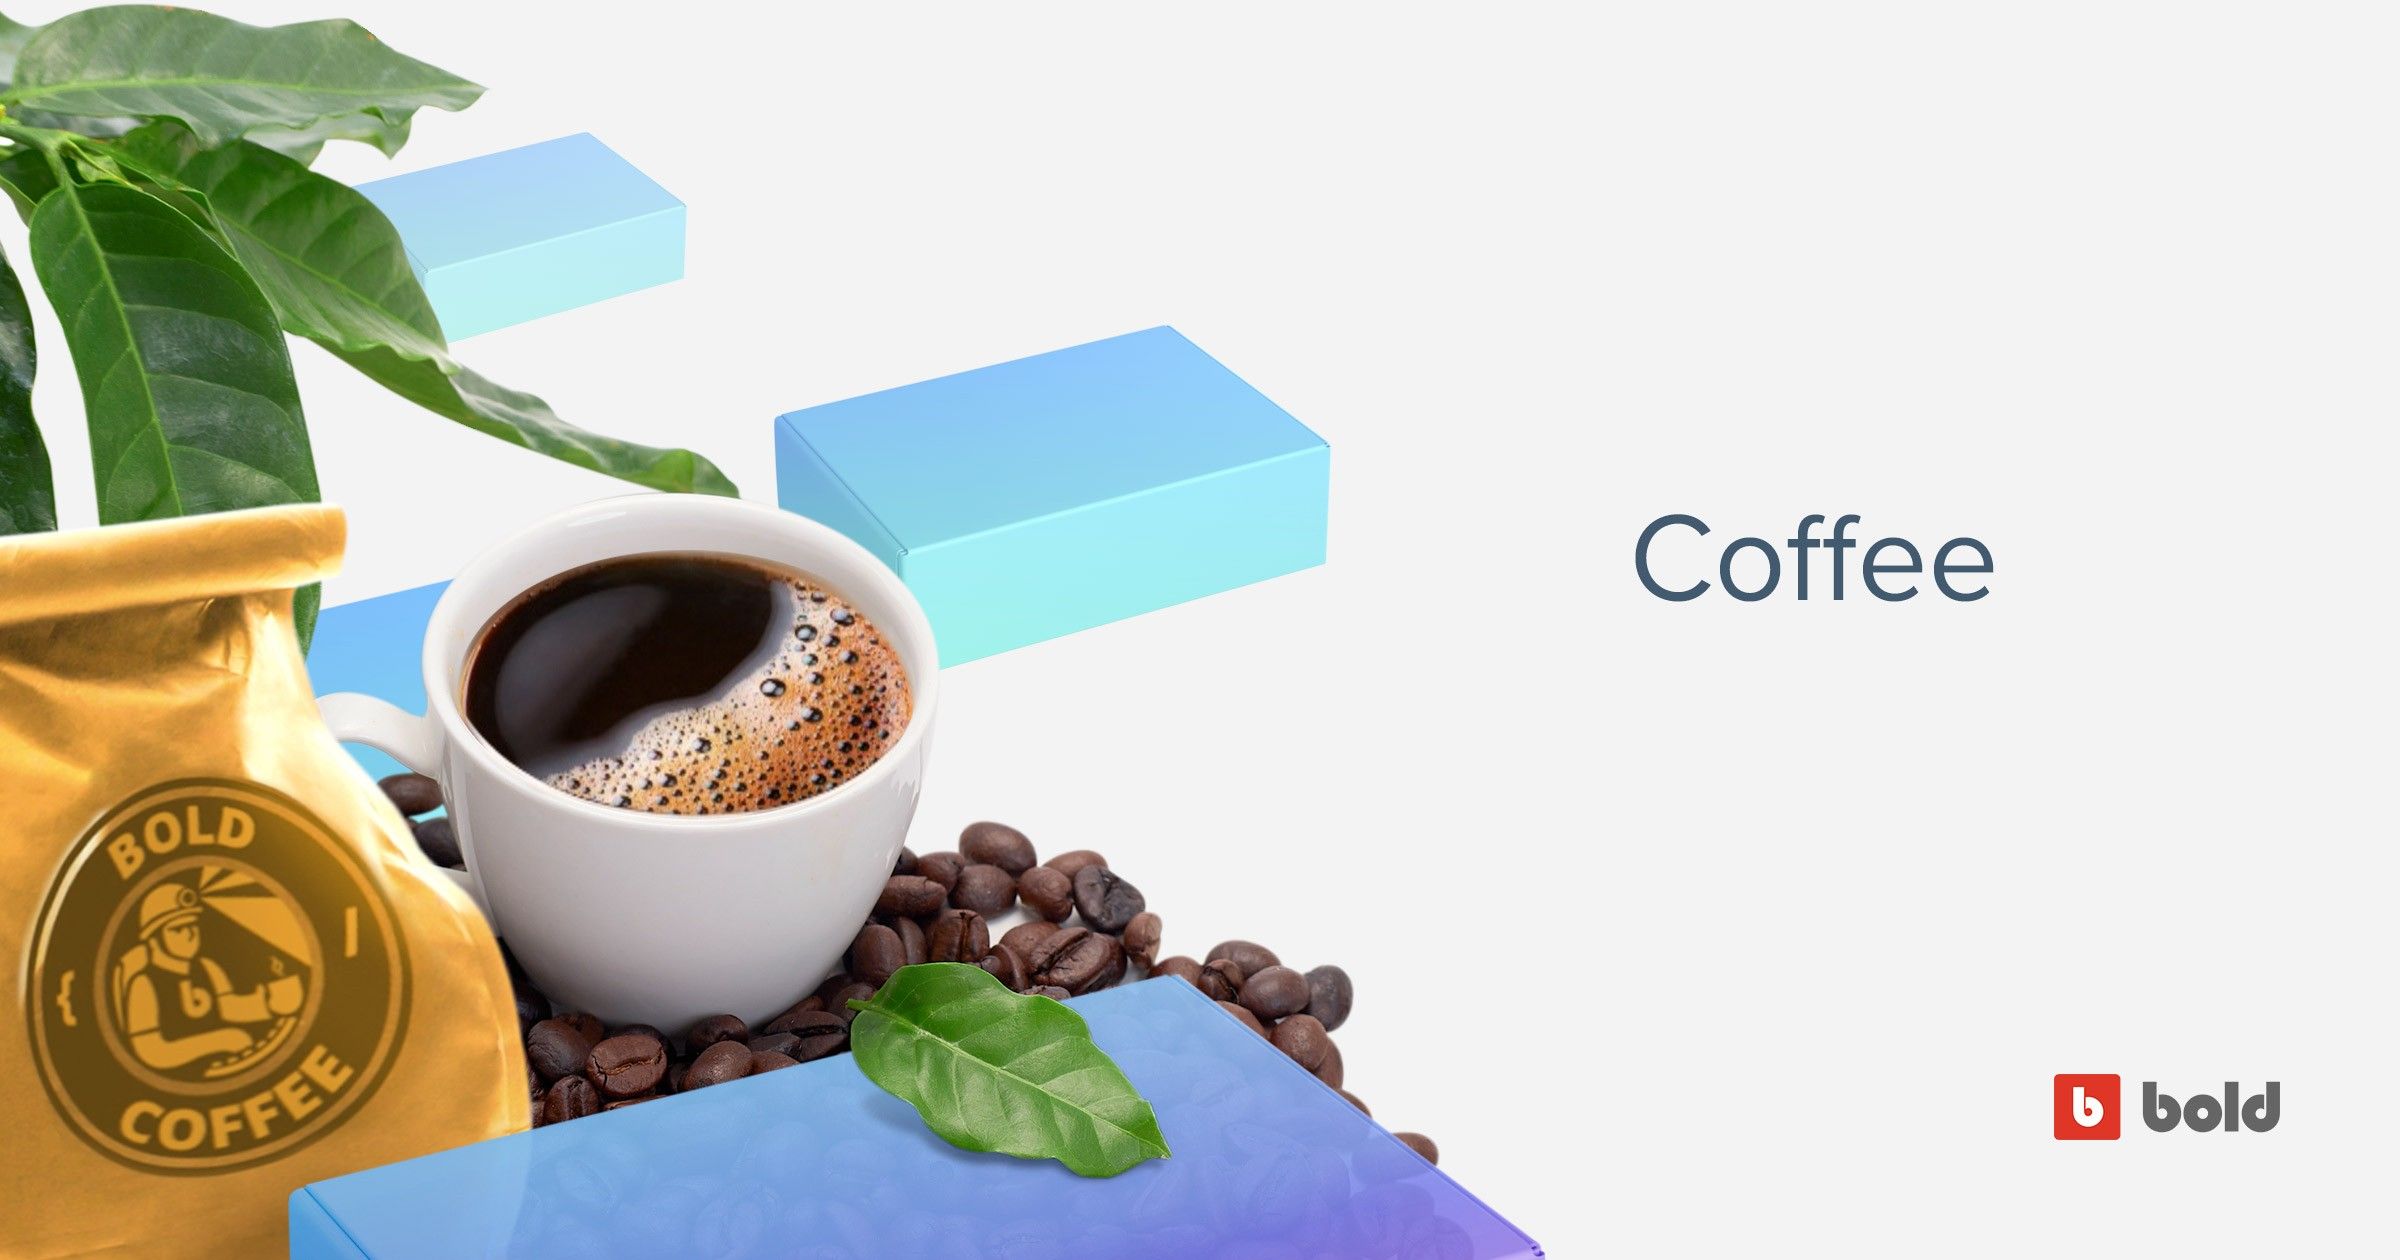 "Coffee" banner with a bag of beans, a cup of coffee, green leaves, and blue rectangles